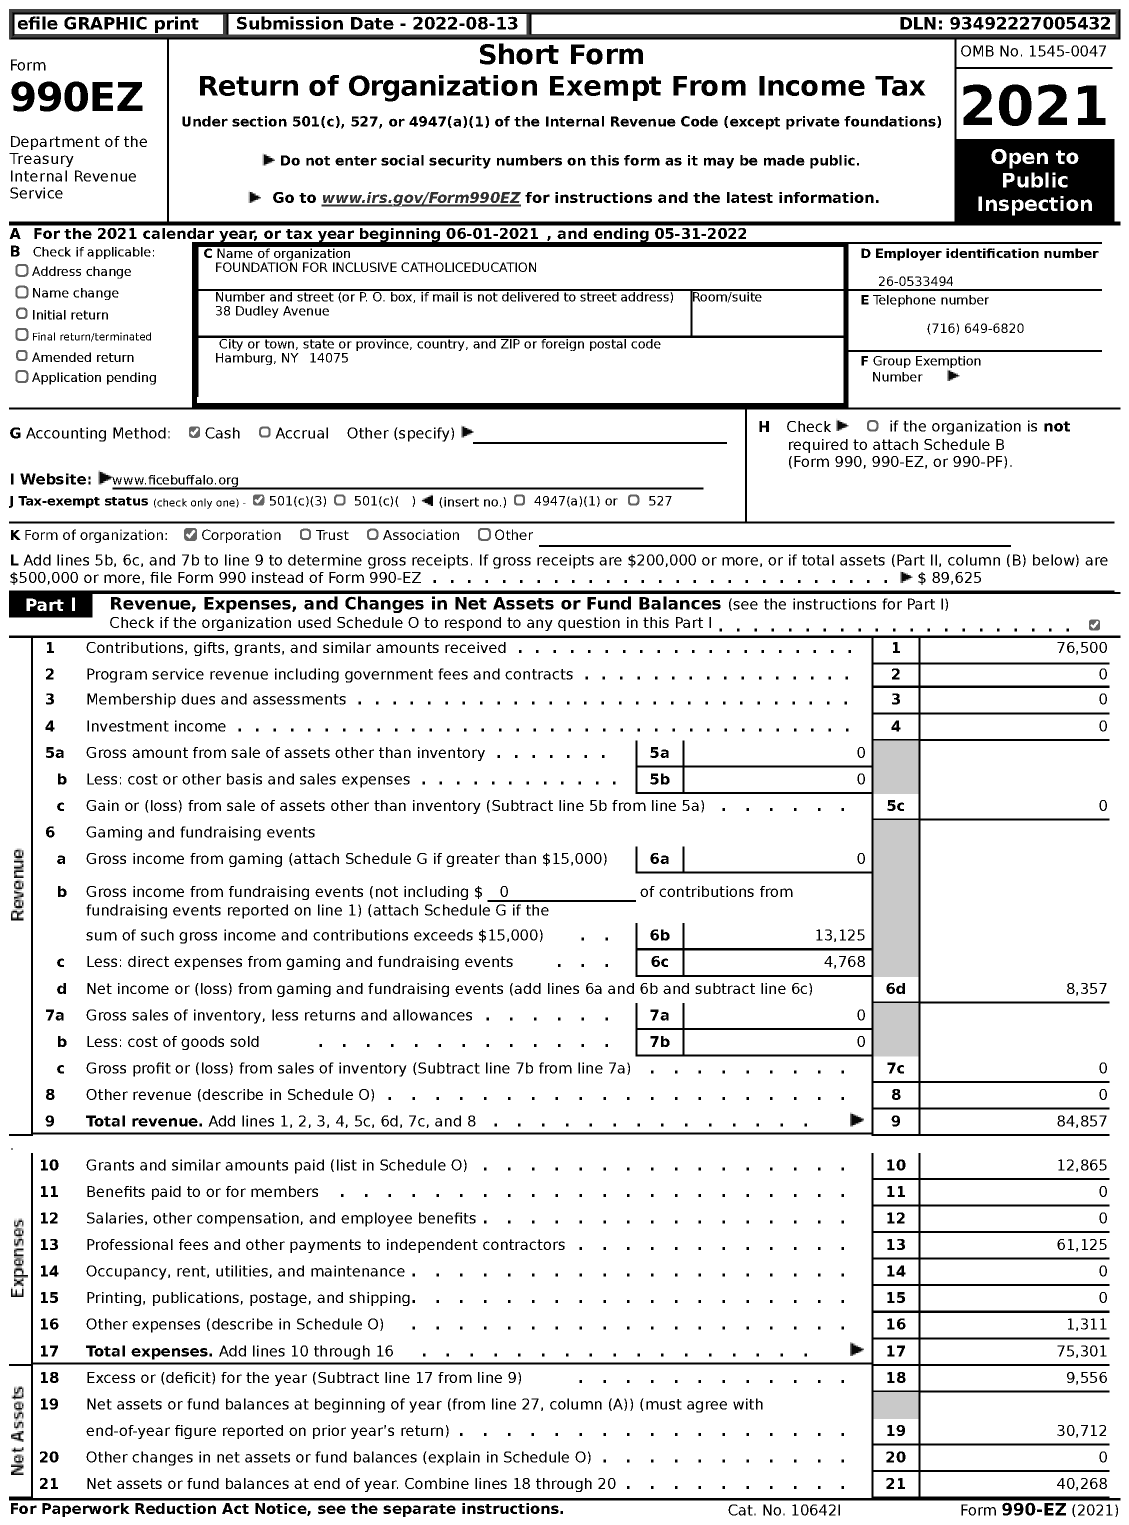 Image of first page of 2021 Form 990EZ for Foundation for Inclusive Catholiceducation